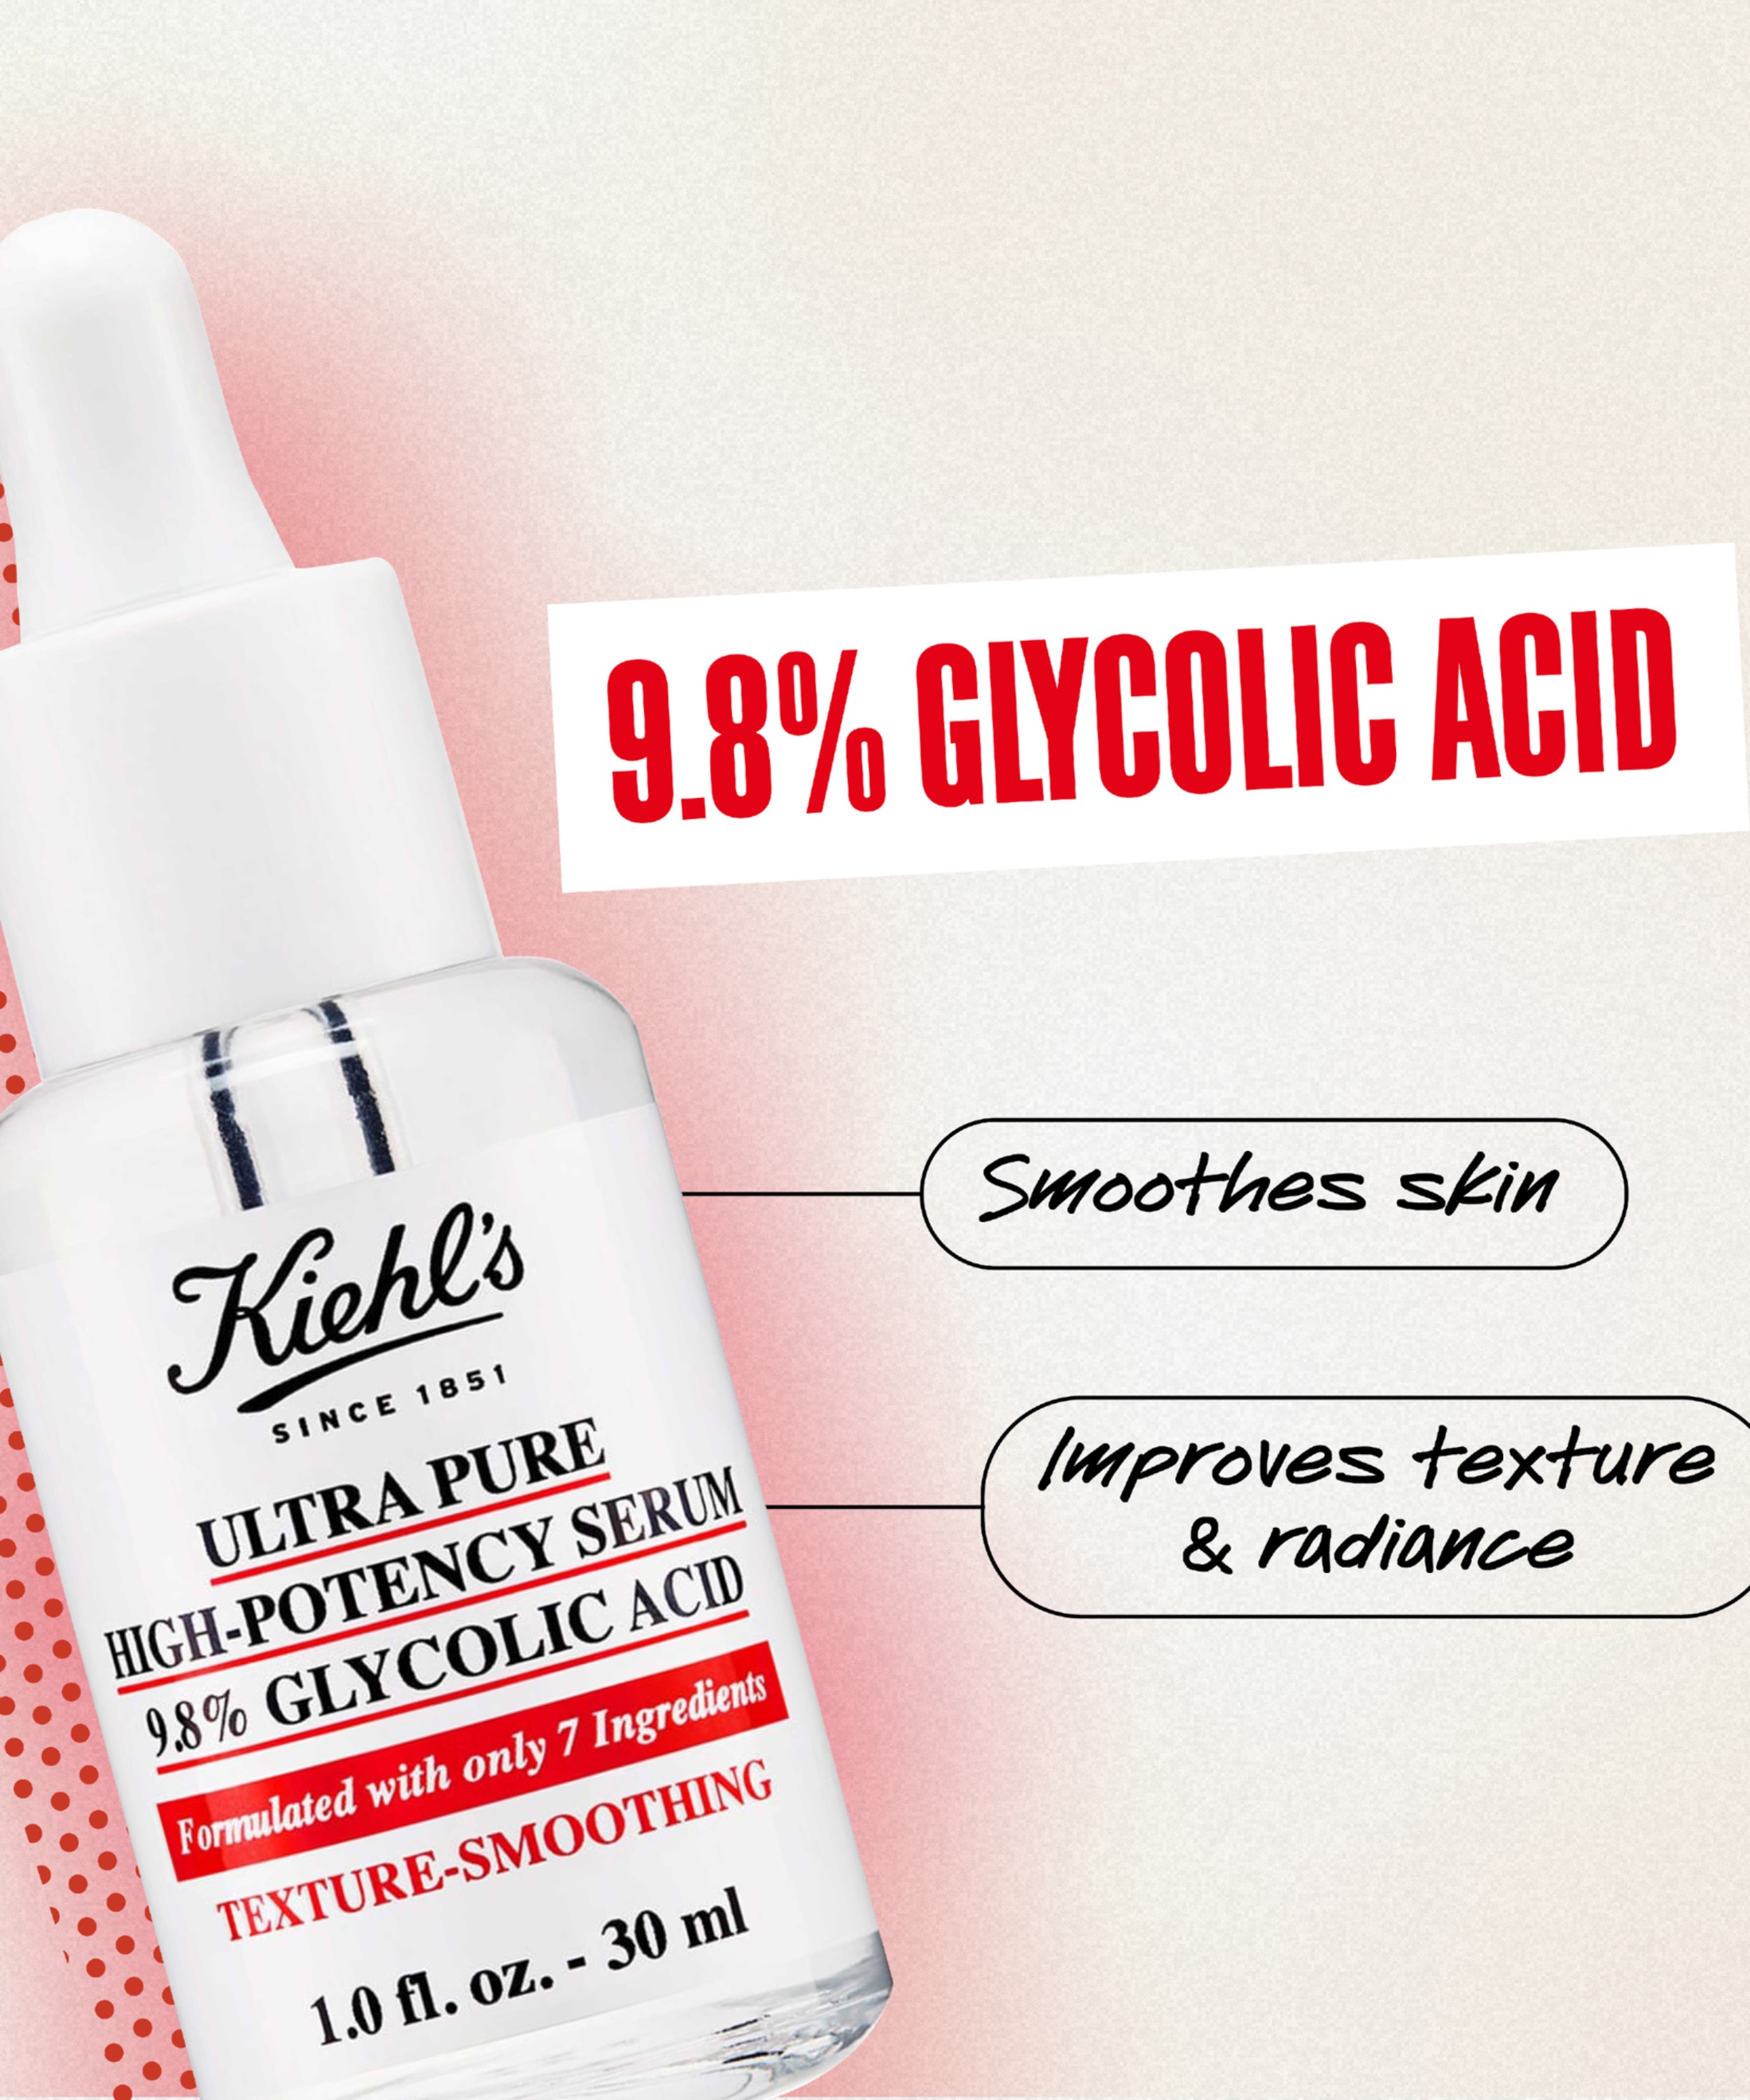 Kiehl's - Ultra Pure High-Potency Serum 9.8% Glycolic Acid 30ml image number 2